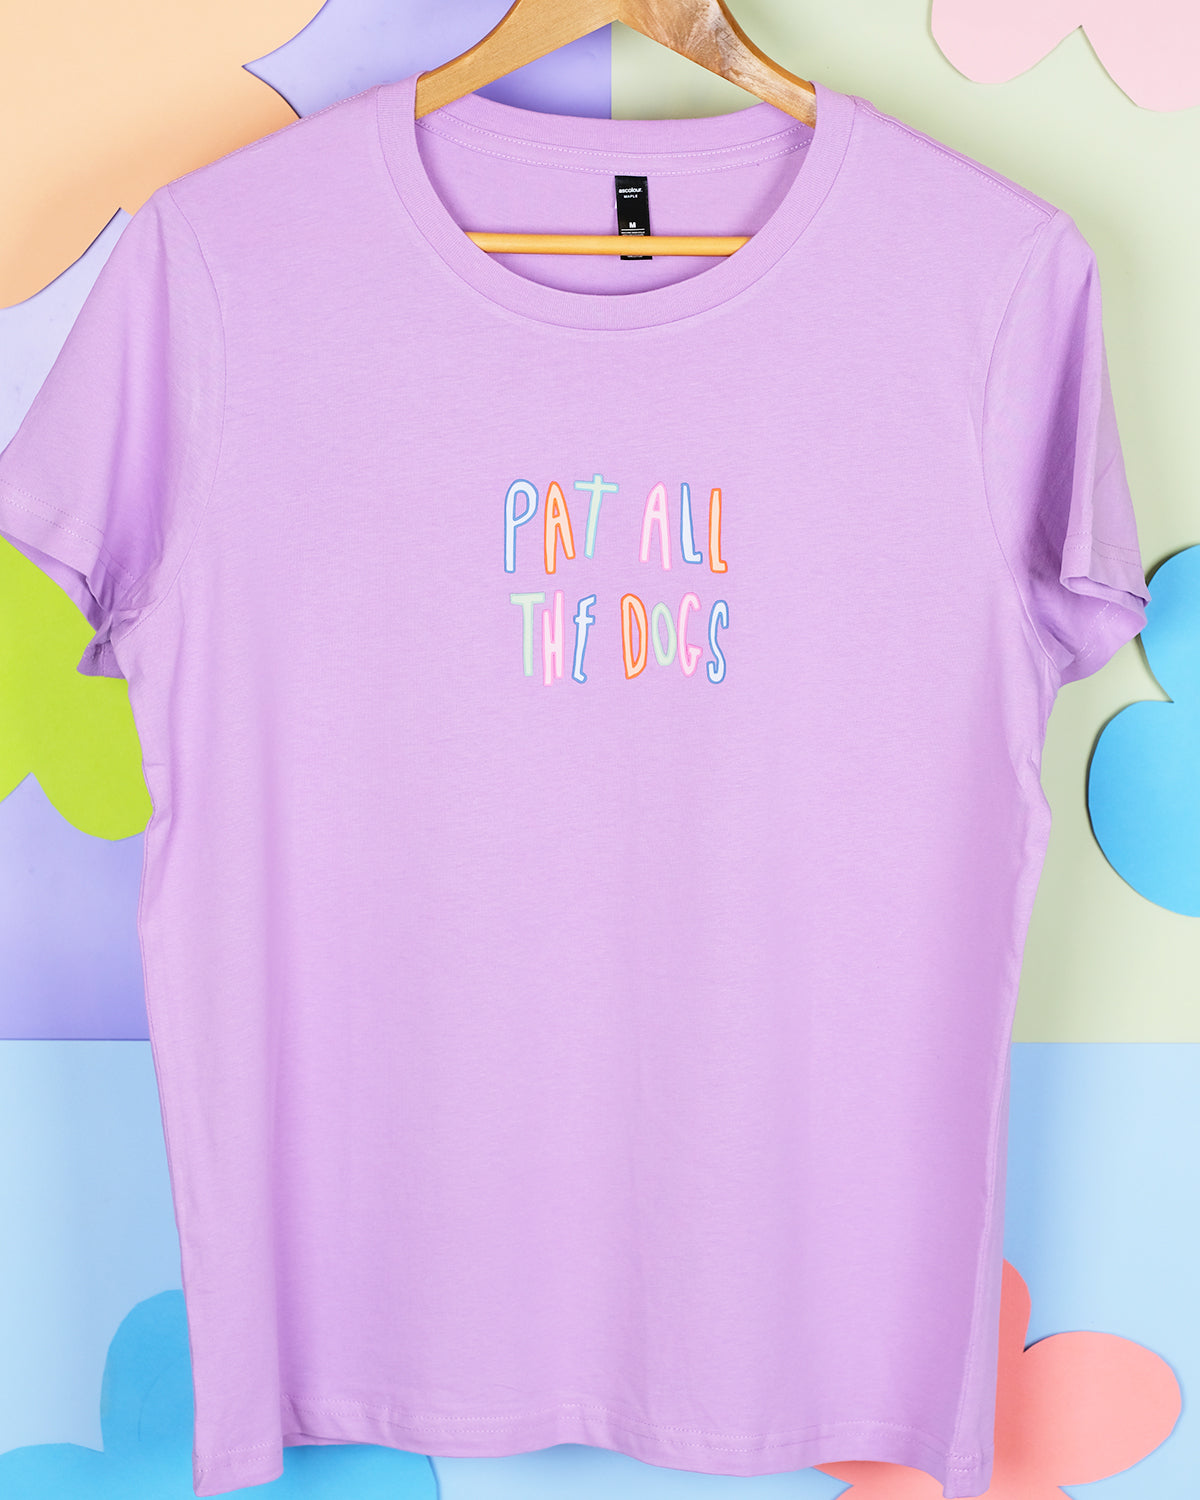 Pat All The Dogs Tee - Adults